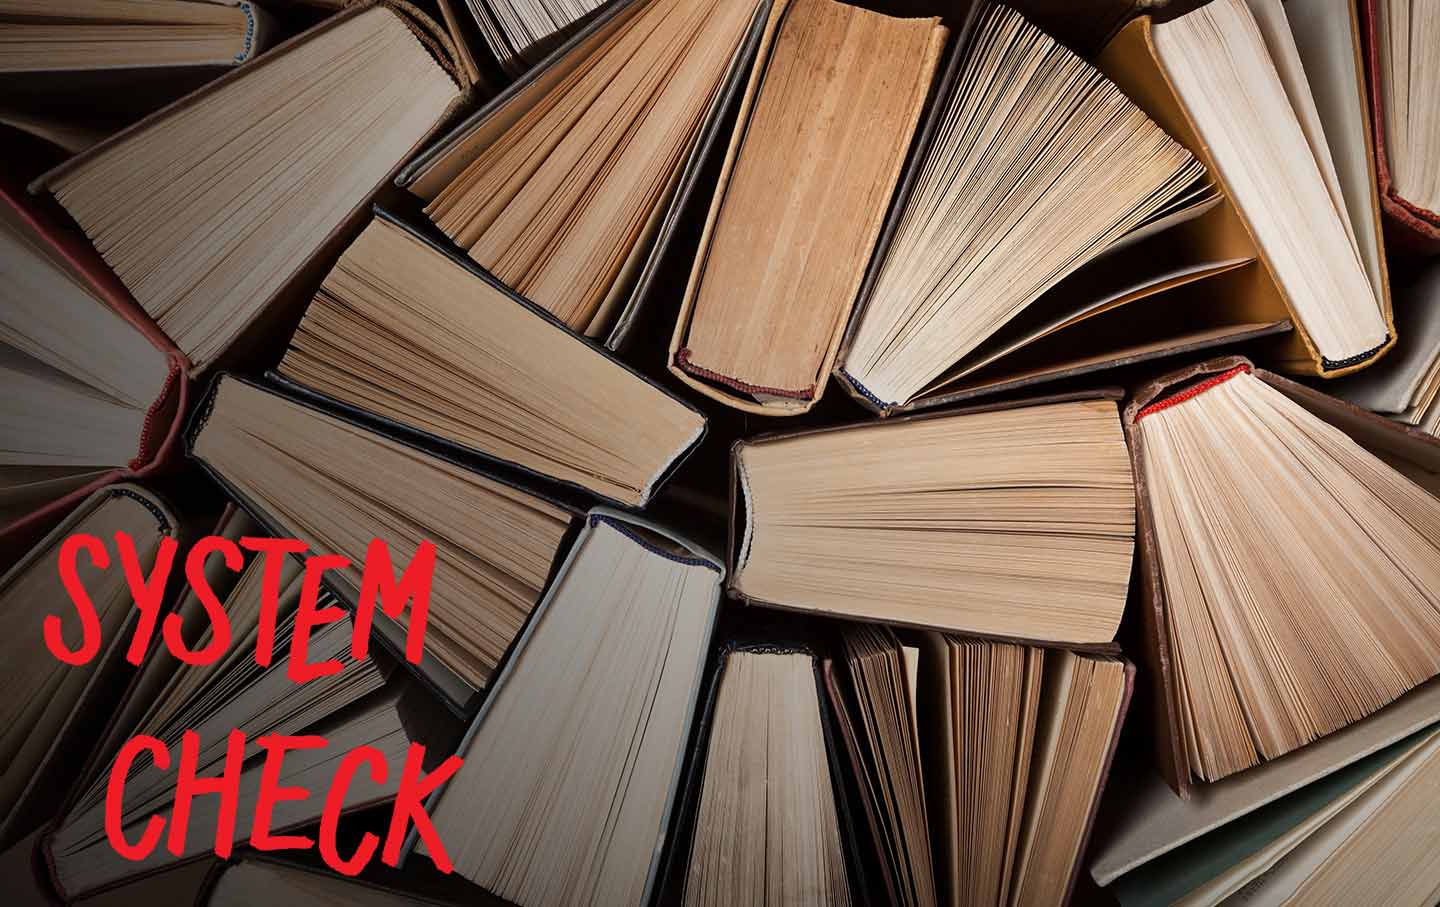 The ‘System’ Check Book Club